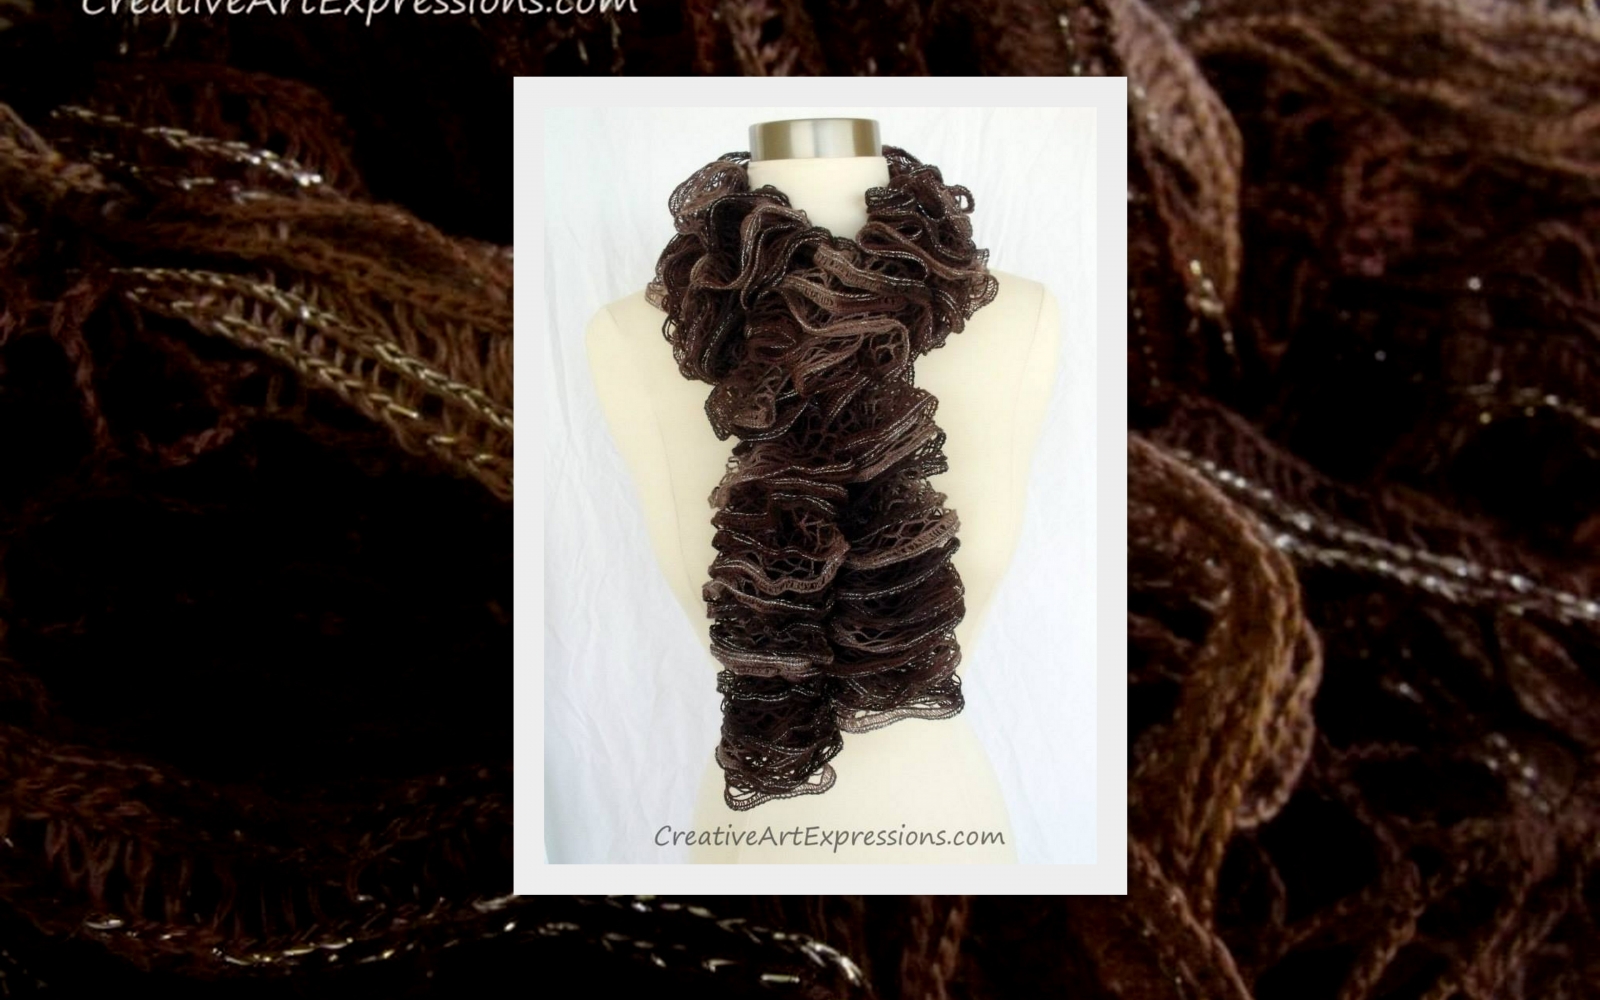 Creative Art Expressions Hand Knitted Shades Of Brown Ruffle Scarf